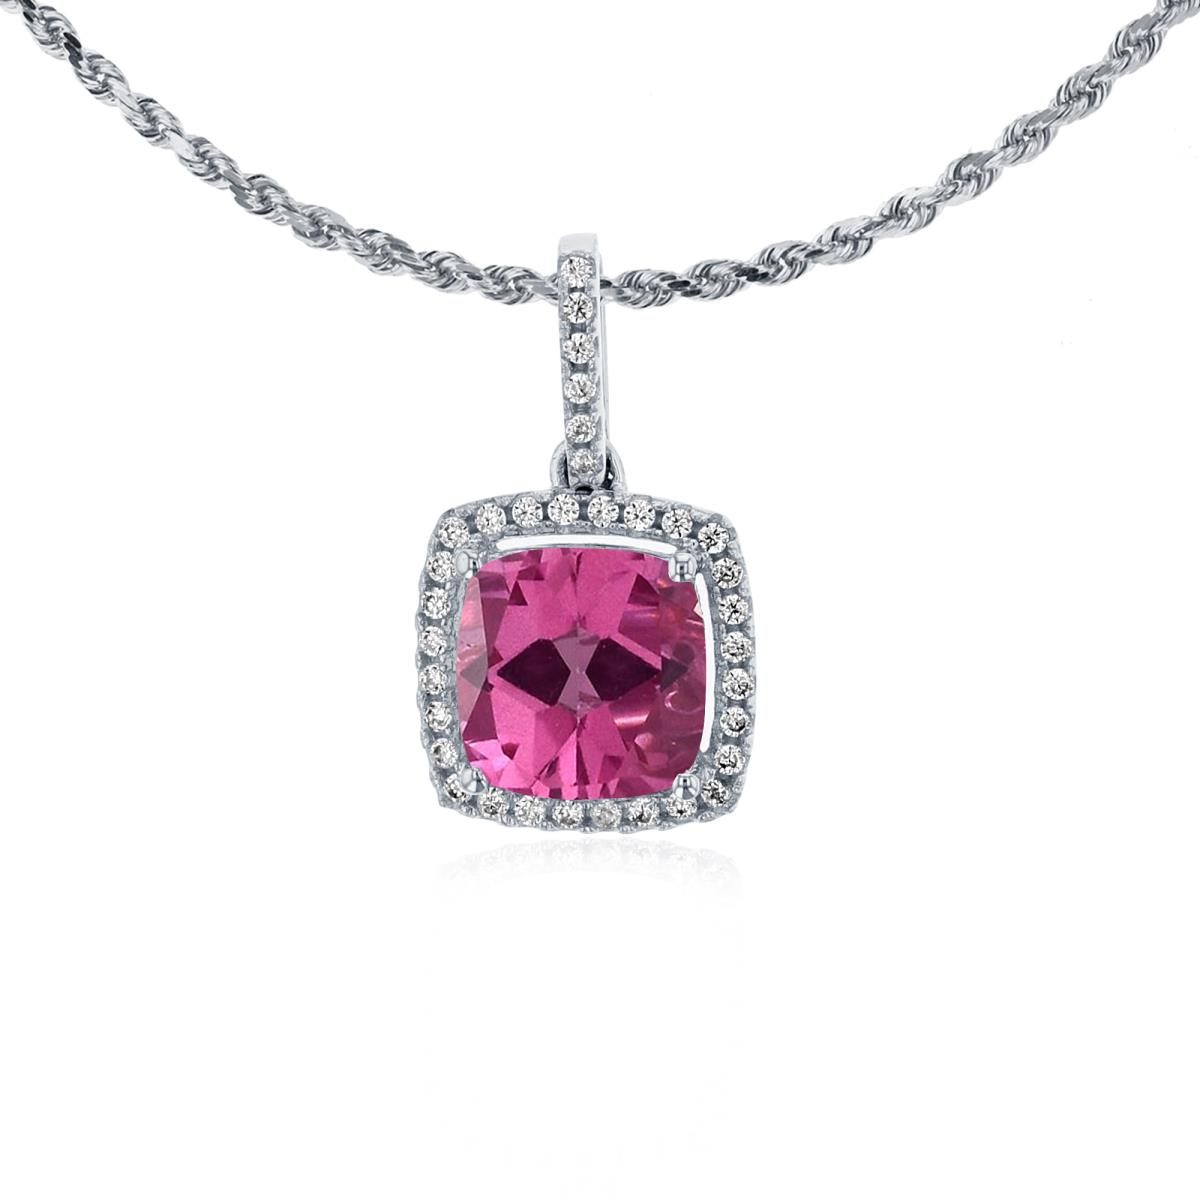 10K White Gold 7mm Cushion Pure Pink & 0.14 CTTW Rnd Diamond Halo 18" Rope Chain Necklace